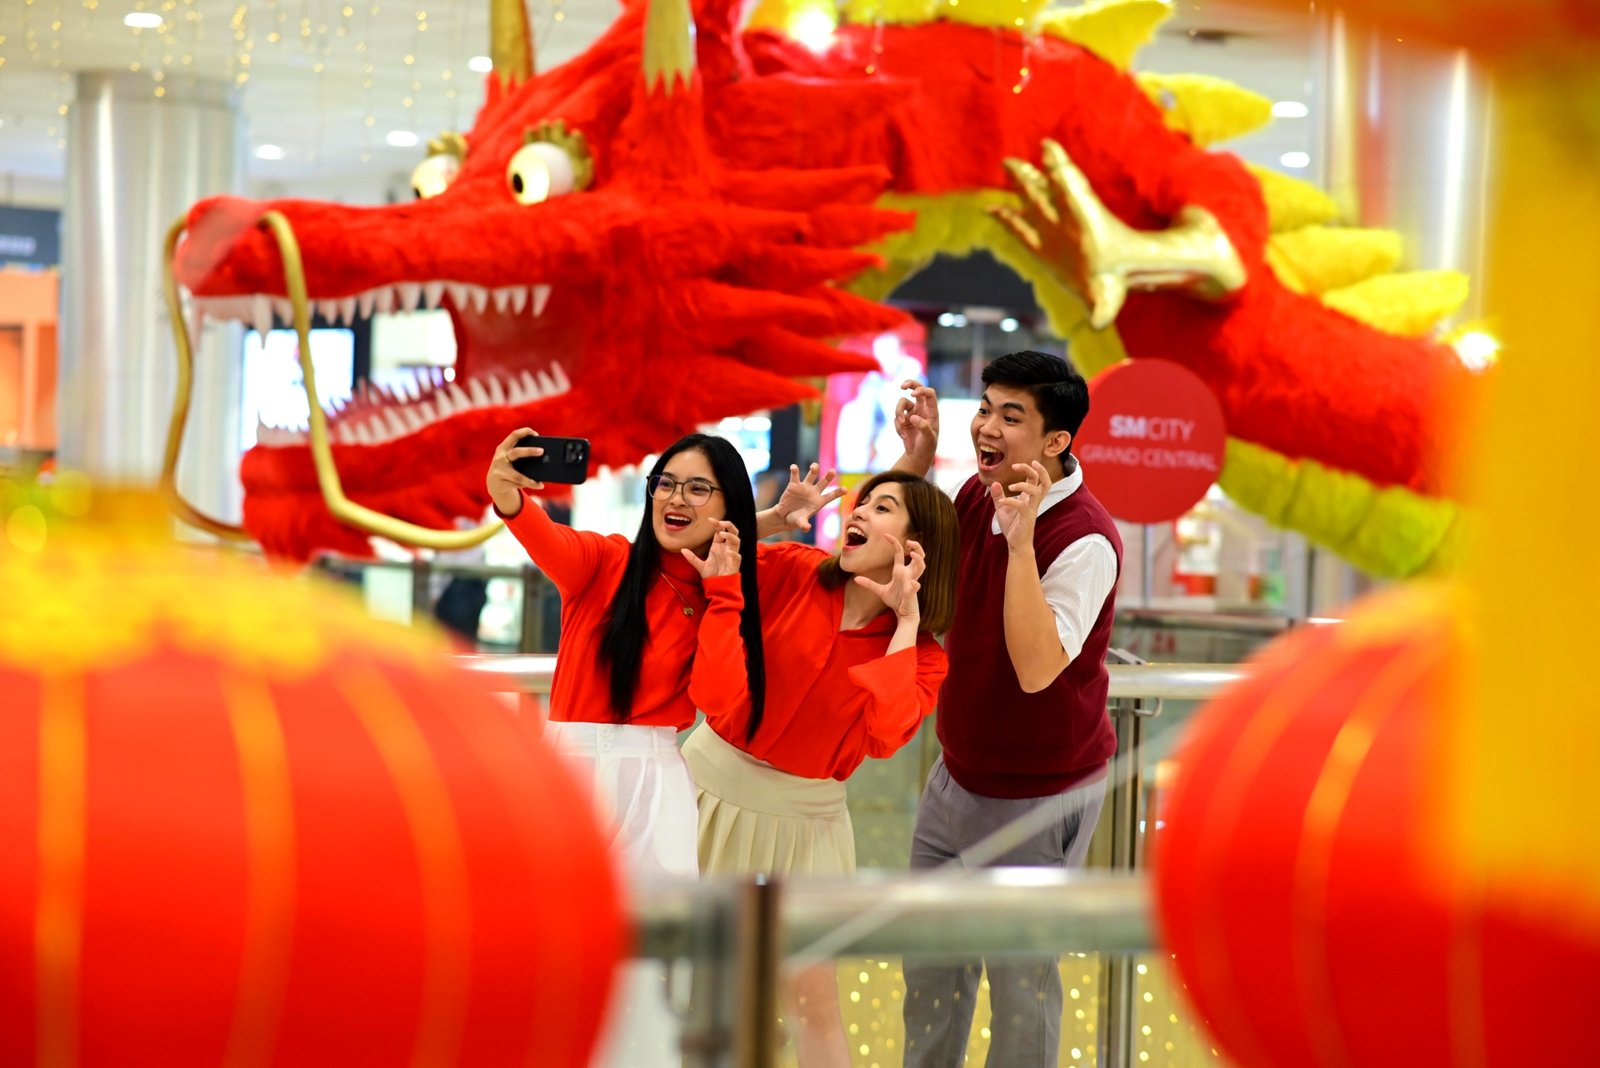 SM CITY GRAND CENTRAL RINGS IN CHINESE NEW YEAR WITH 43-FOOT GIANT DRAGON INSTALLATION